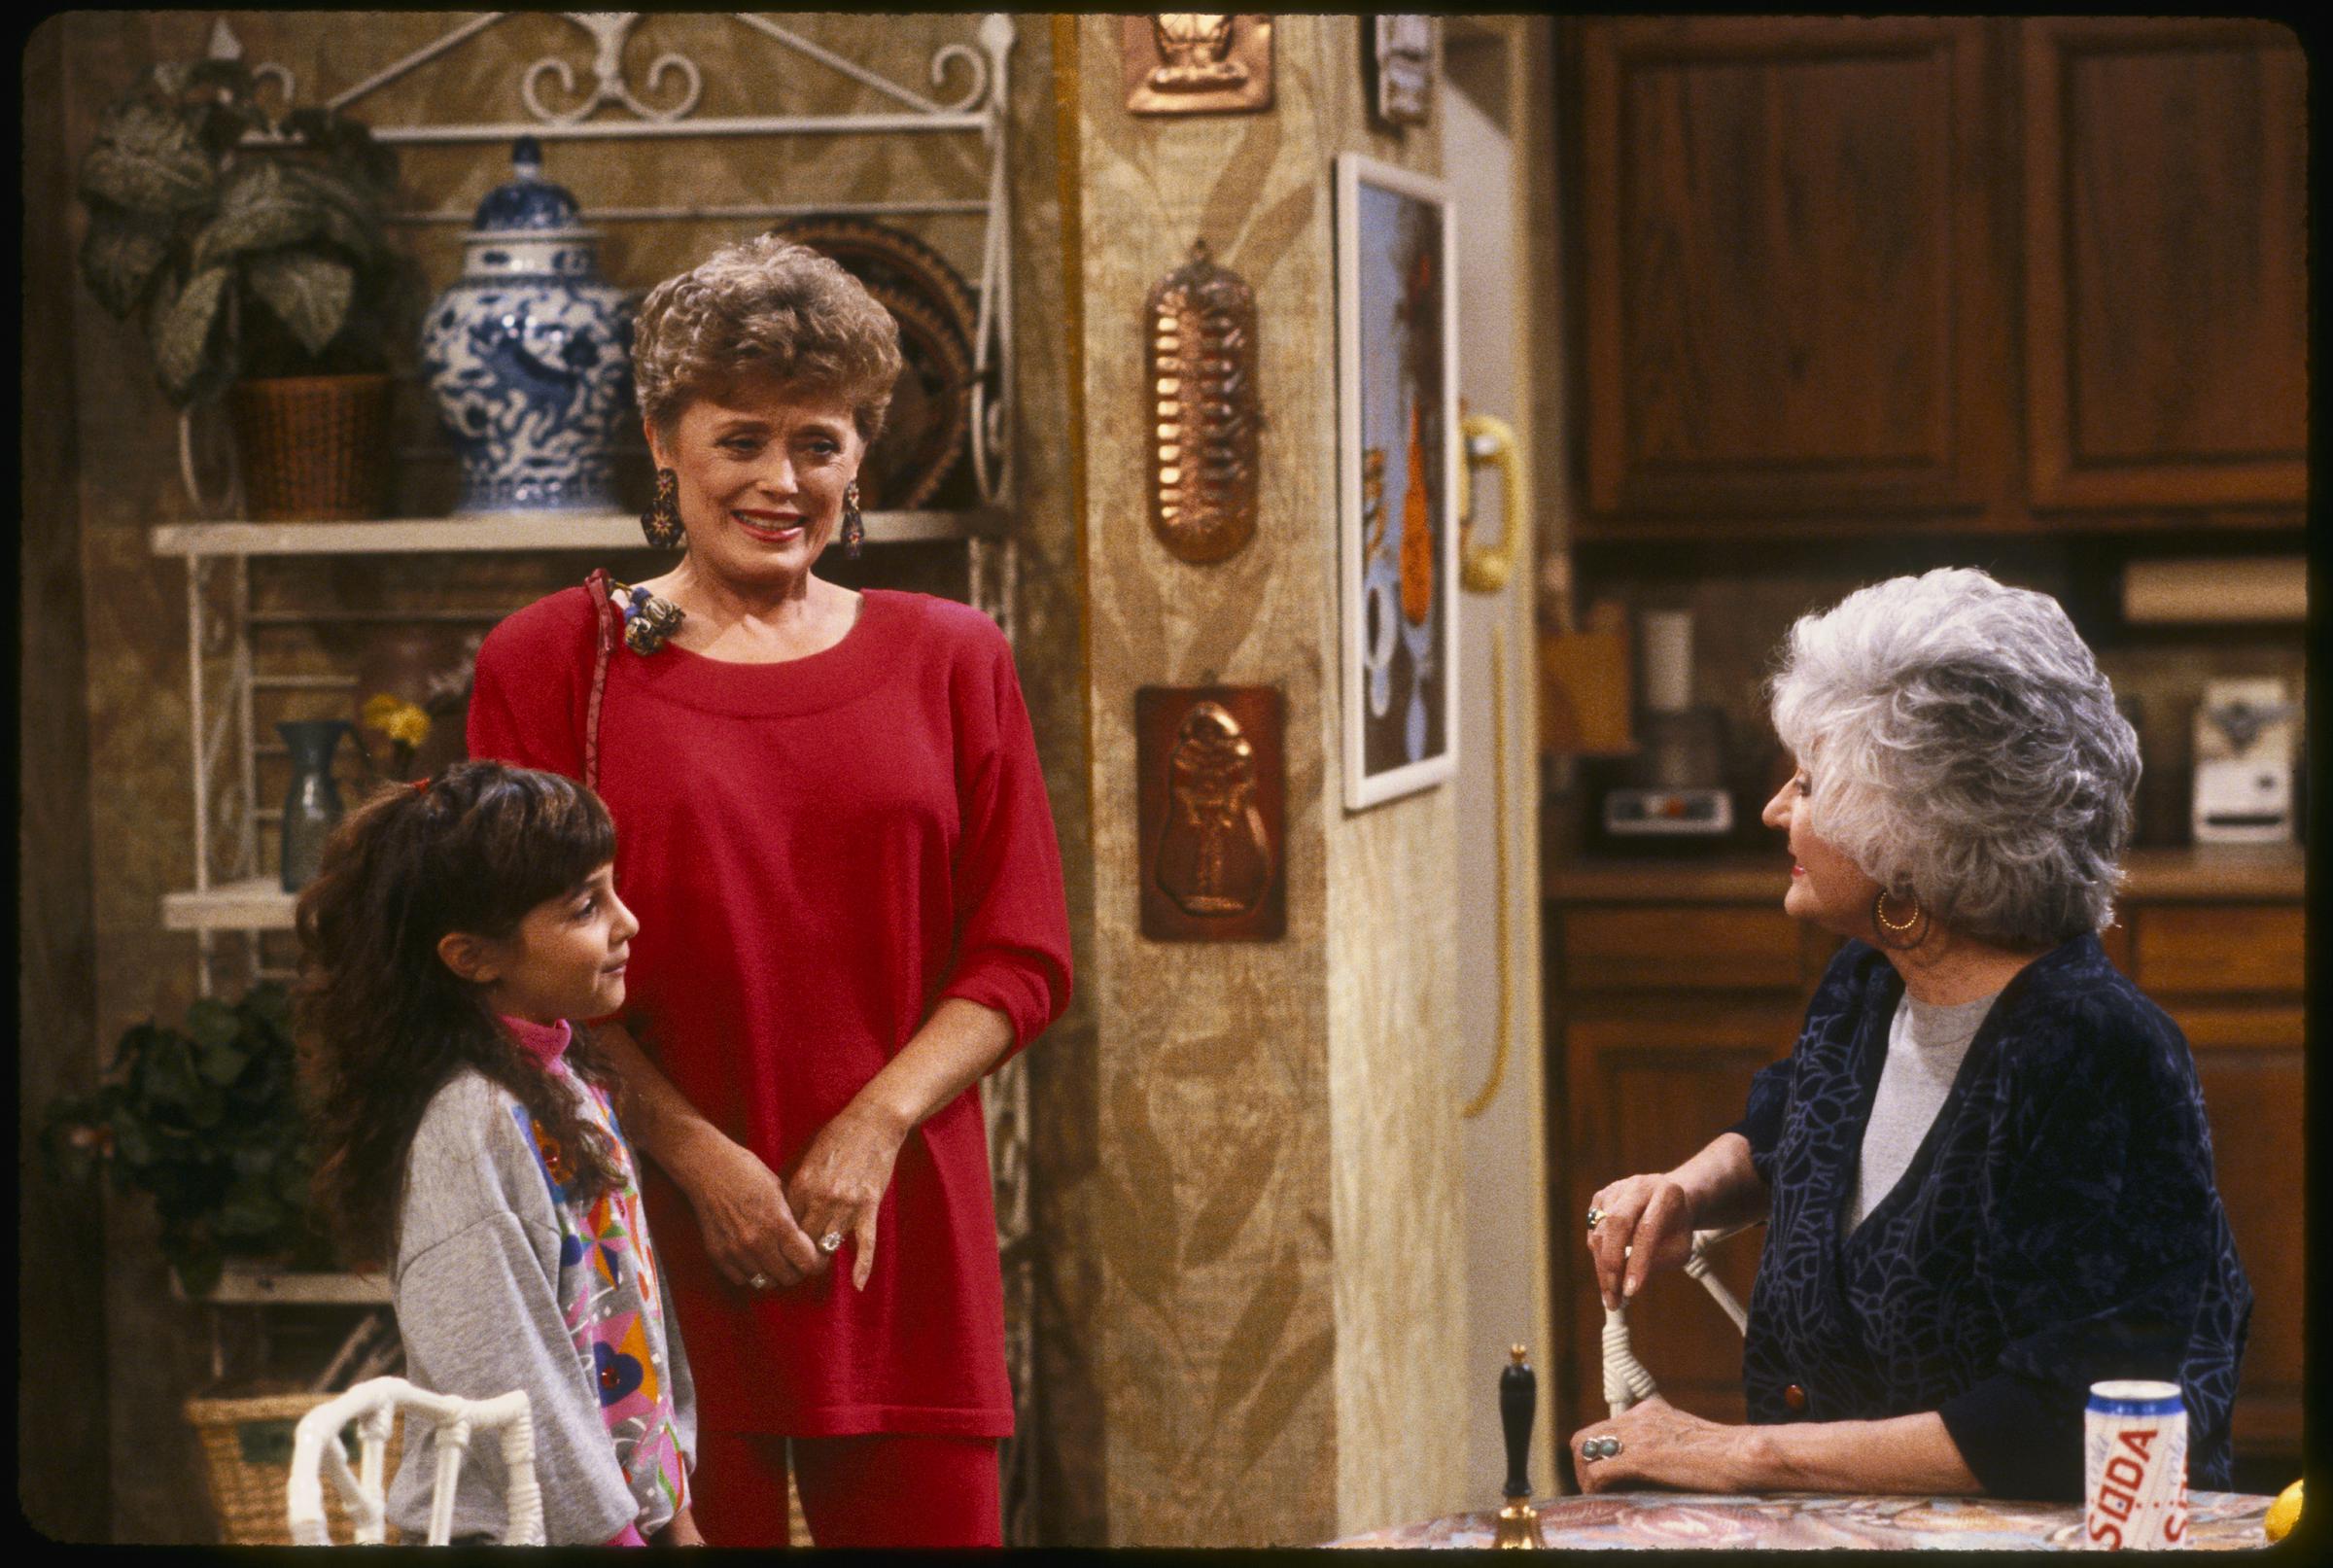 The child star, Rue McClanahan, and Bea Arthur on "The Golden Girls" in 1992. | Source: Getty Images